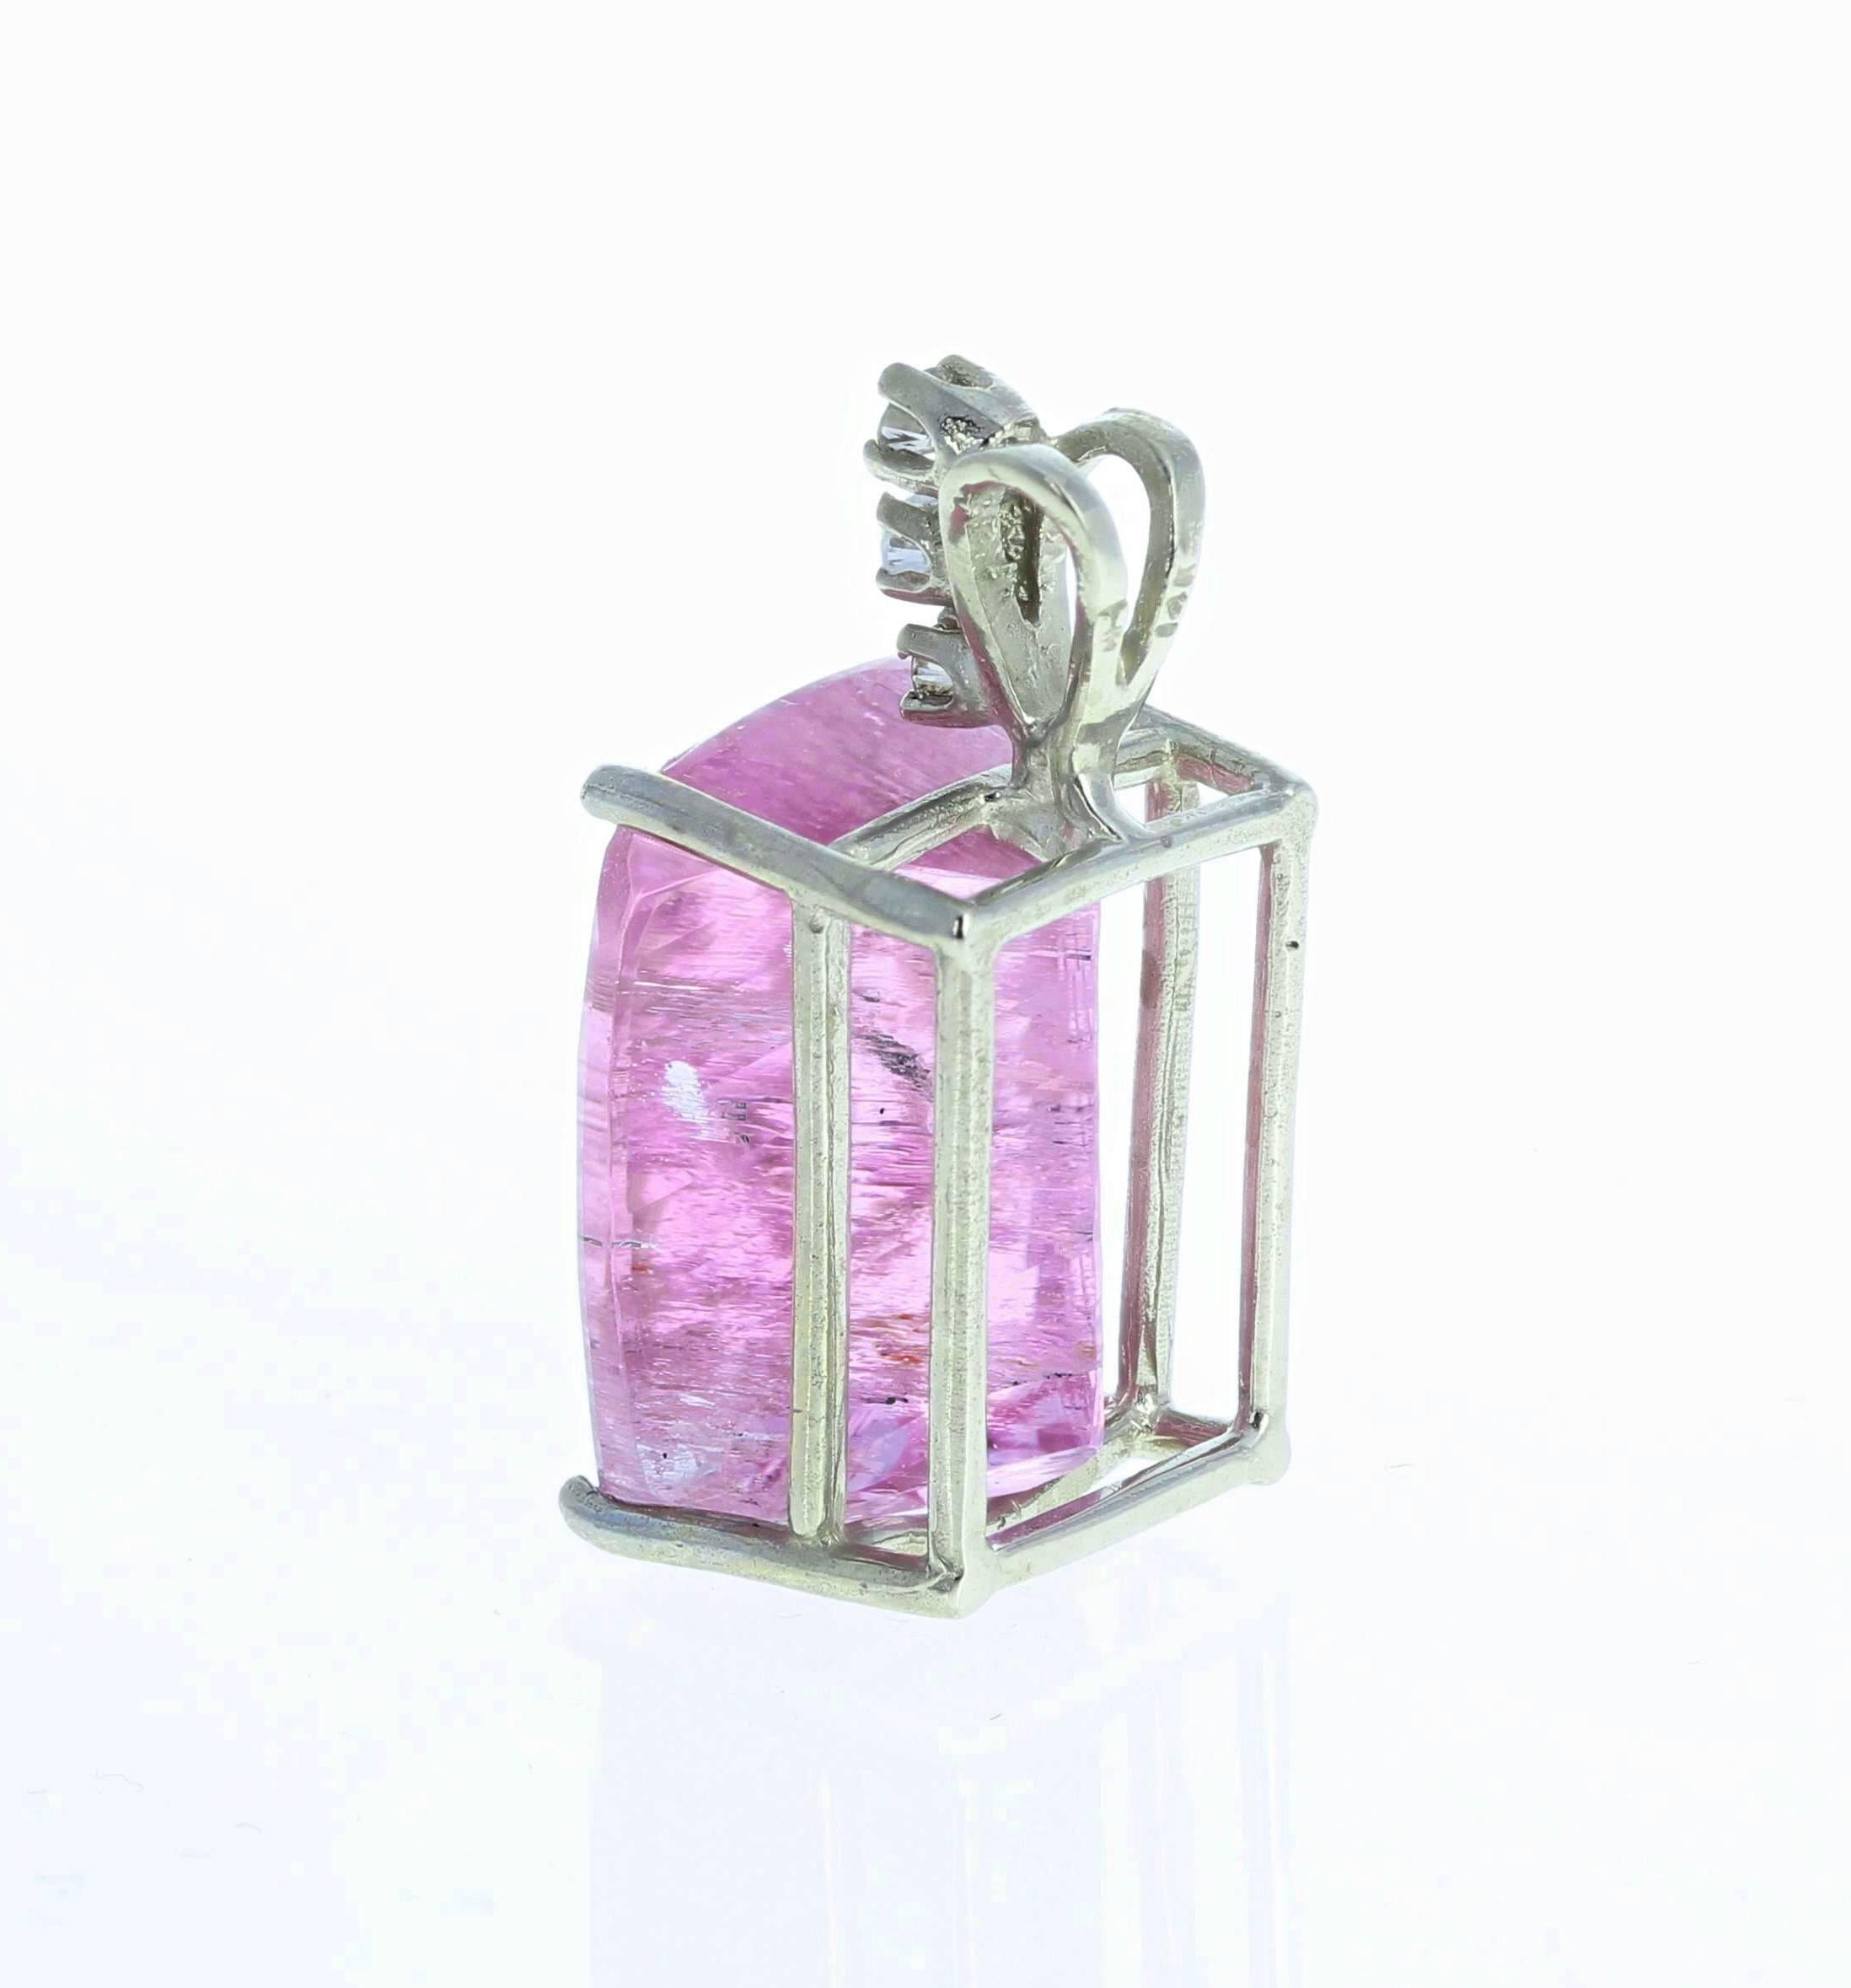 Glittering unique pinkypurple natural Brazilian cushion cut Kunzite (19.9 mm x 15.4 mm) enhanced with sparkling white diamonds set in a 14Kt white gold enhancer pendant.  Spectacular optical effect in the Kunzite exhibits pink reflections and fire